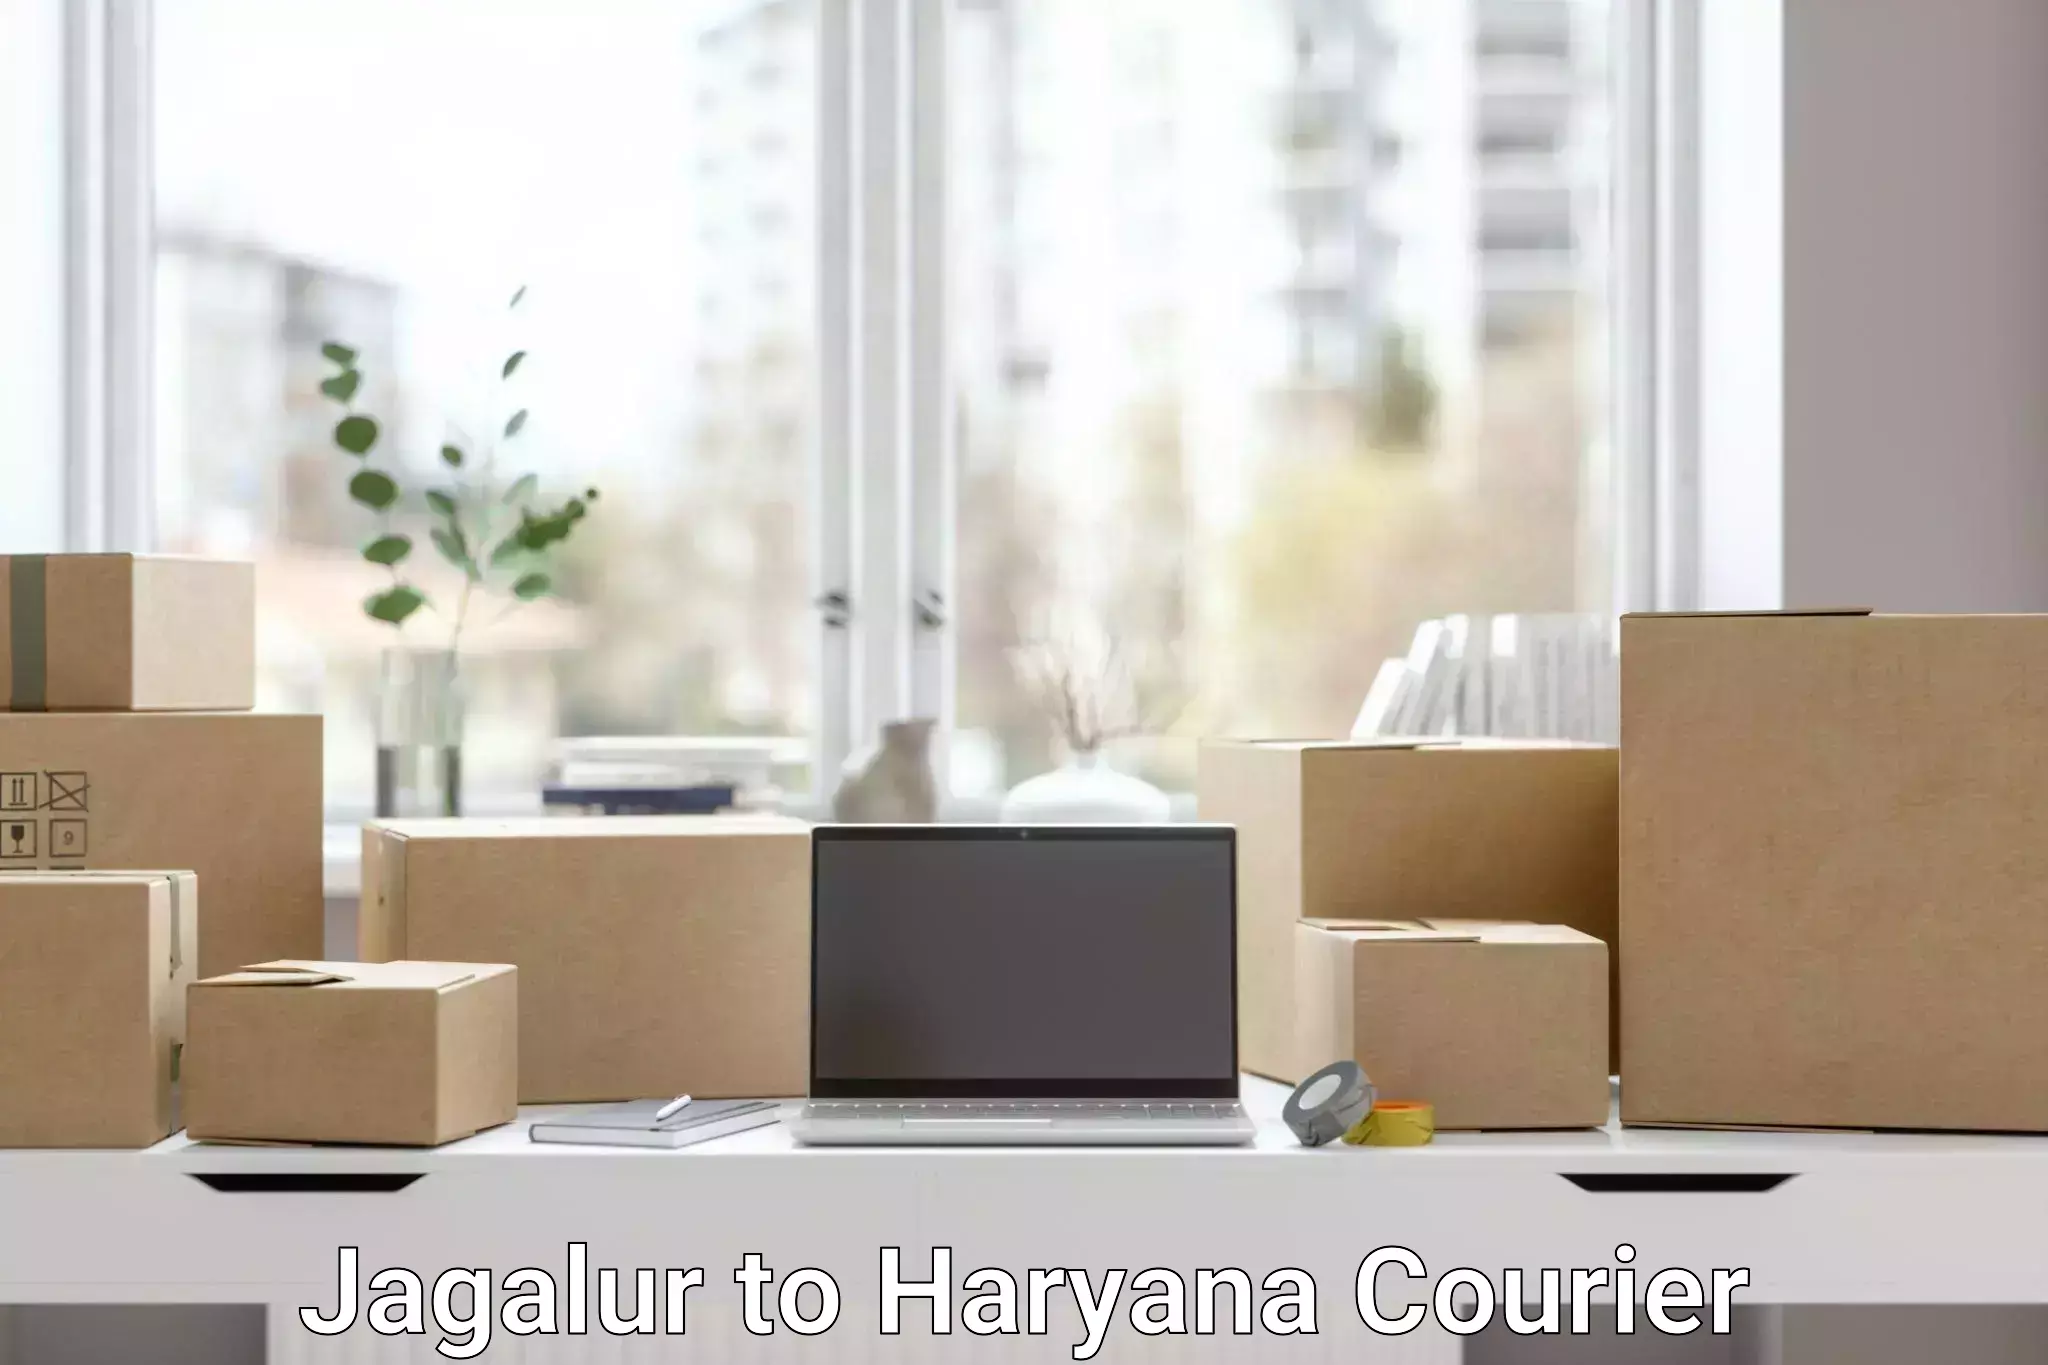 Multi-national courier services Jagalur to Gurugram